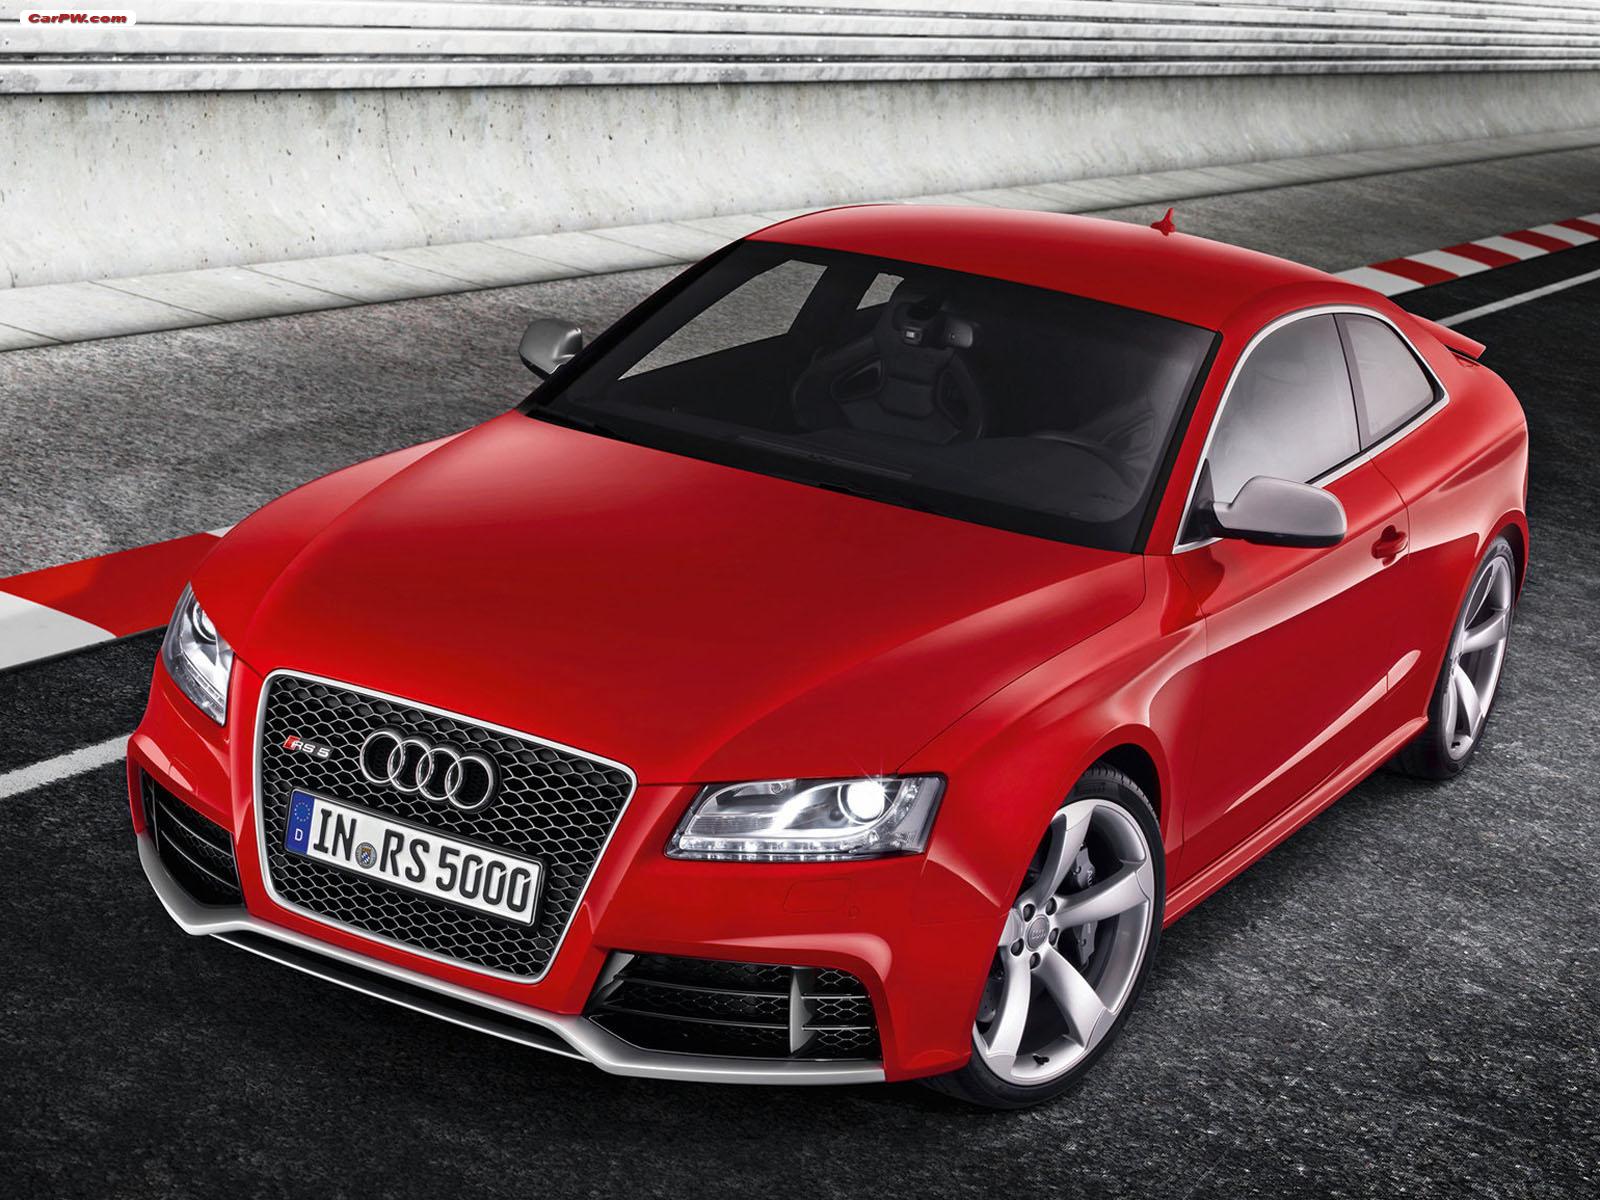 Audi Rs5 HD Cool Wallpaper High Definition